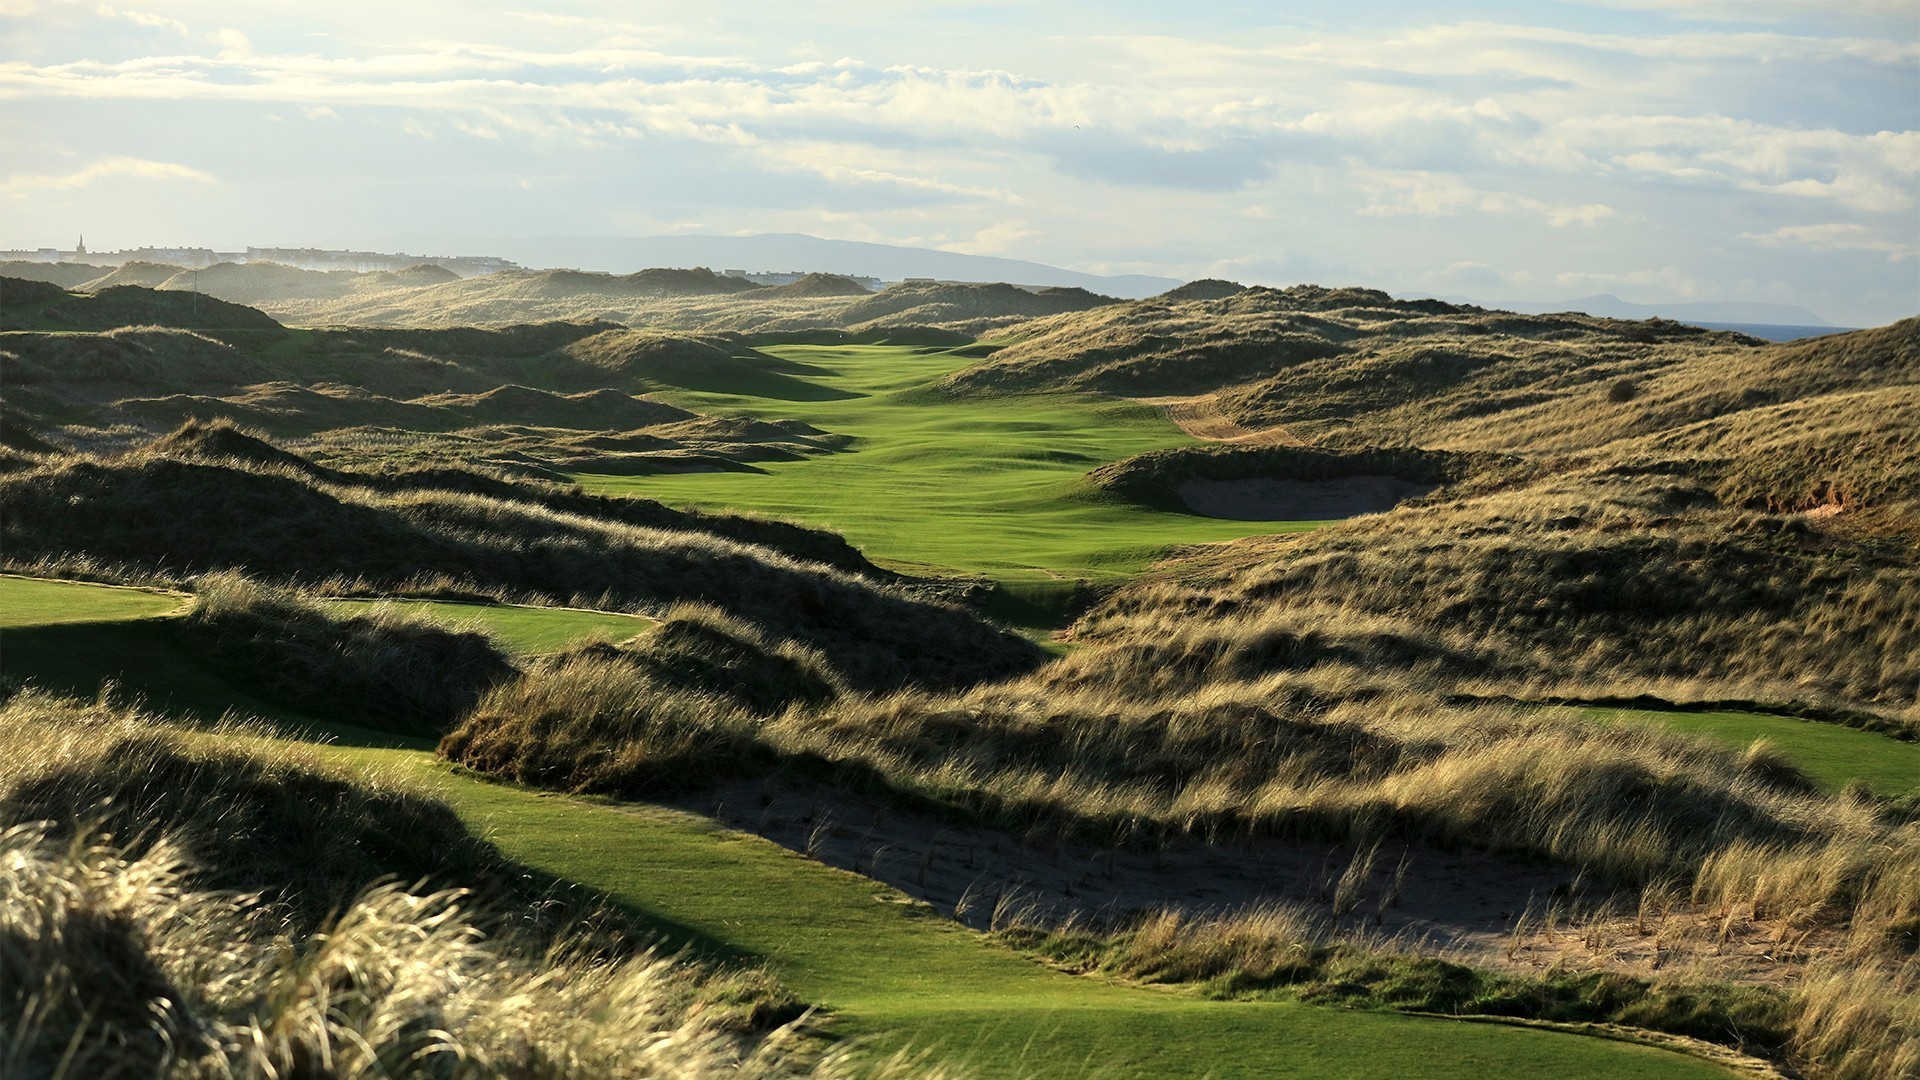 Golf Vacation Package - AWESOME Northern Ireland Links Experience! - 6 Nights and 5 Rounds from $325 per person/per day!